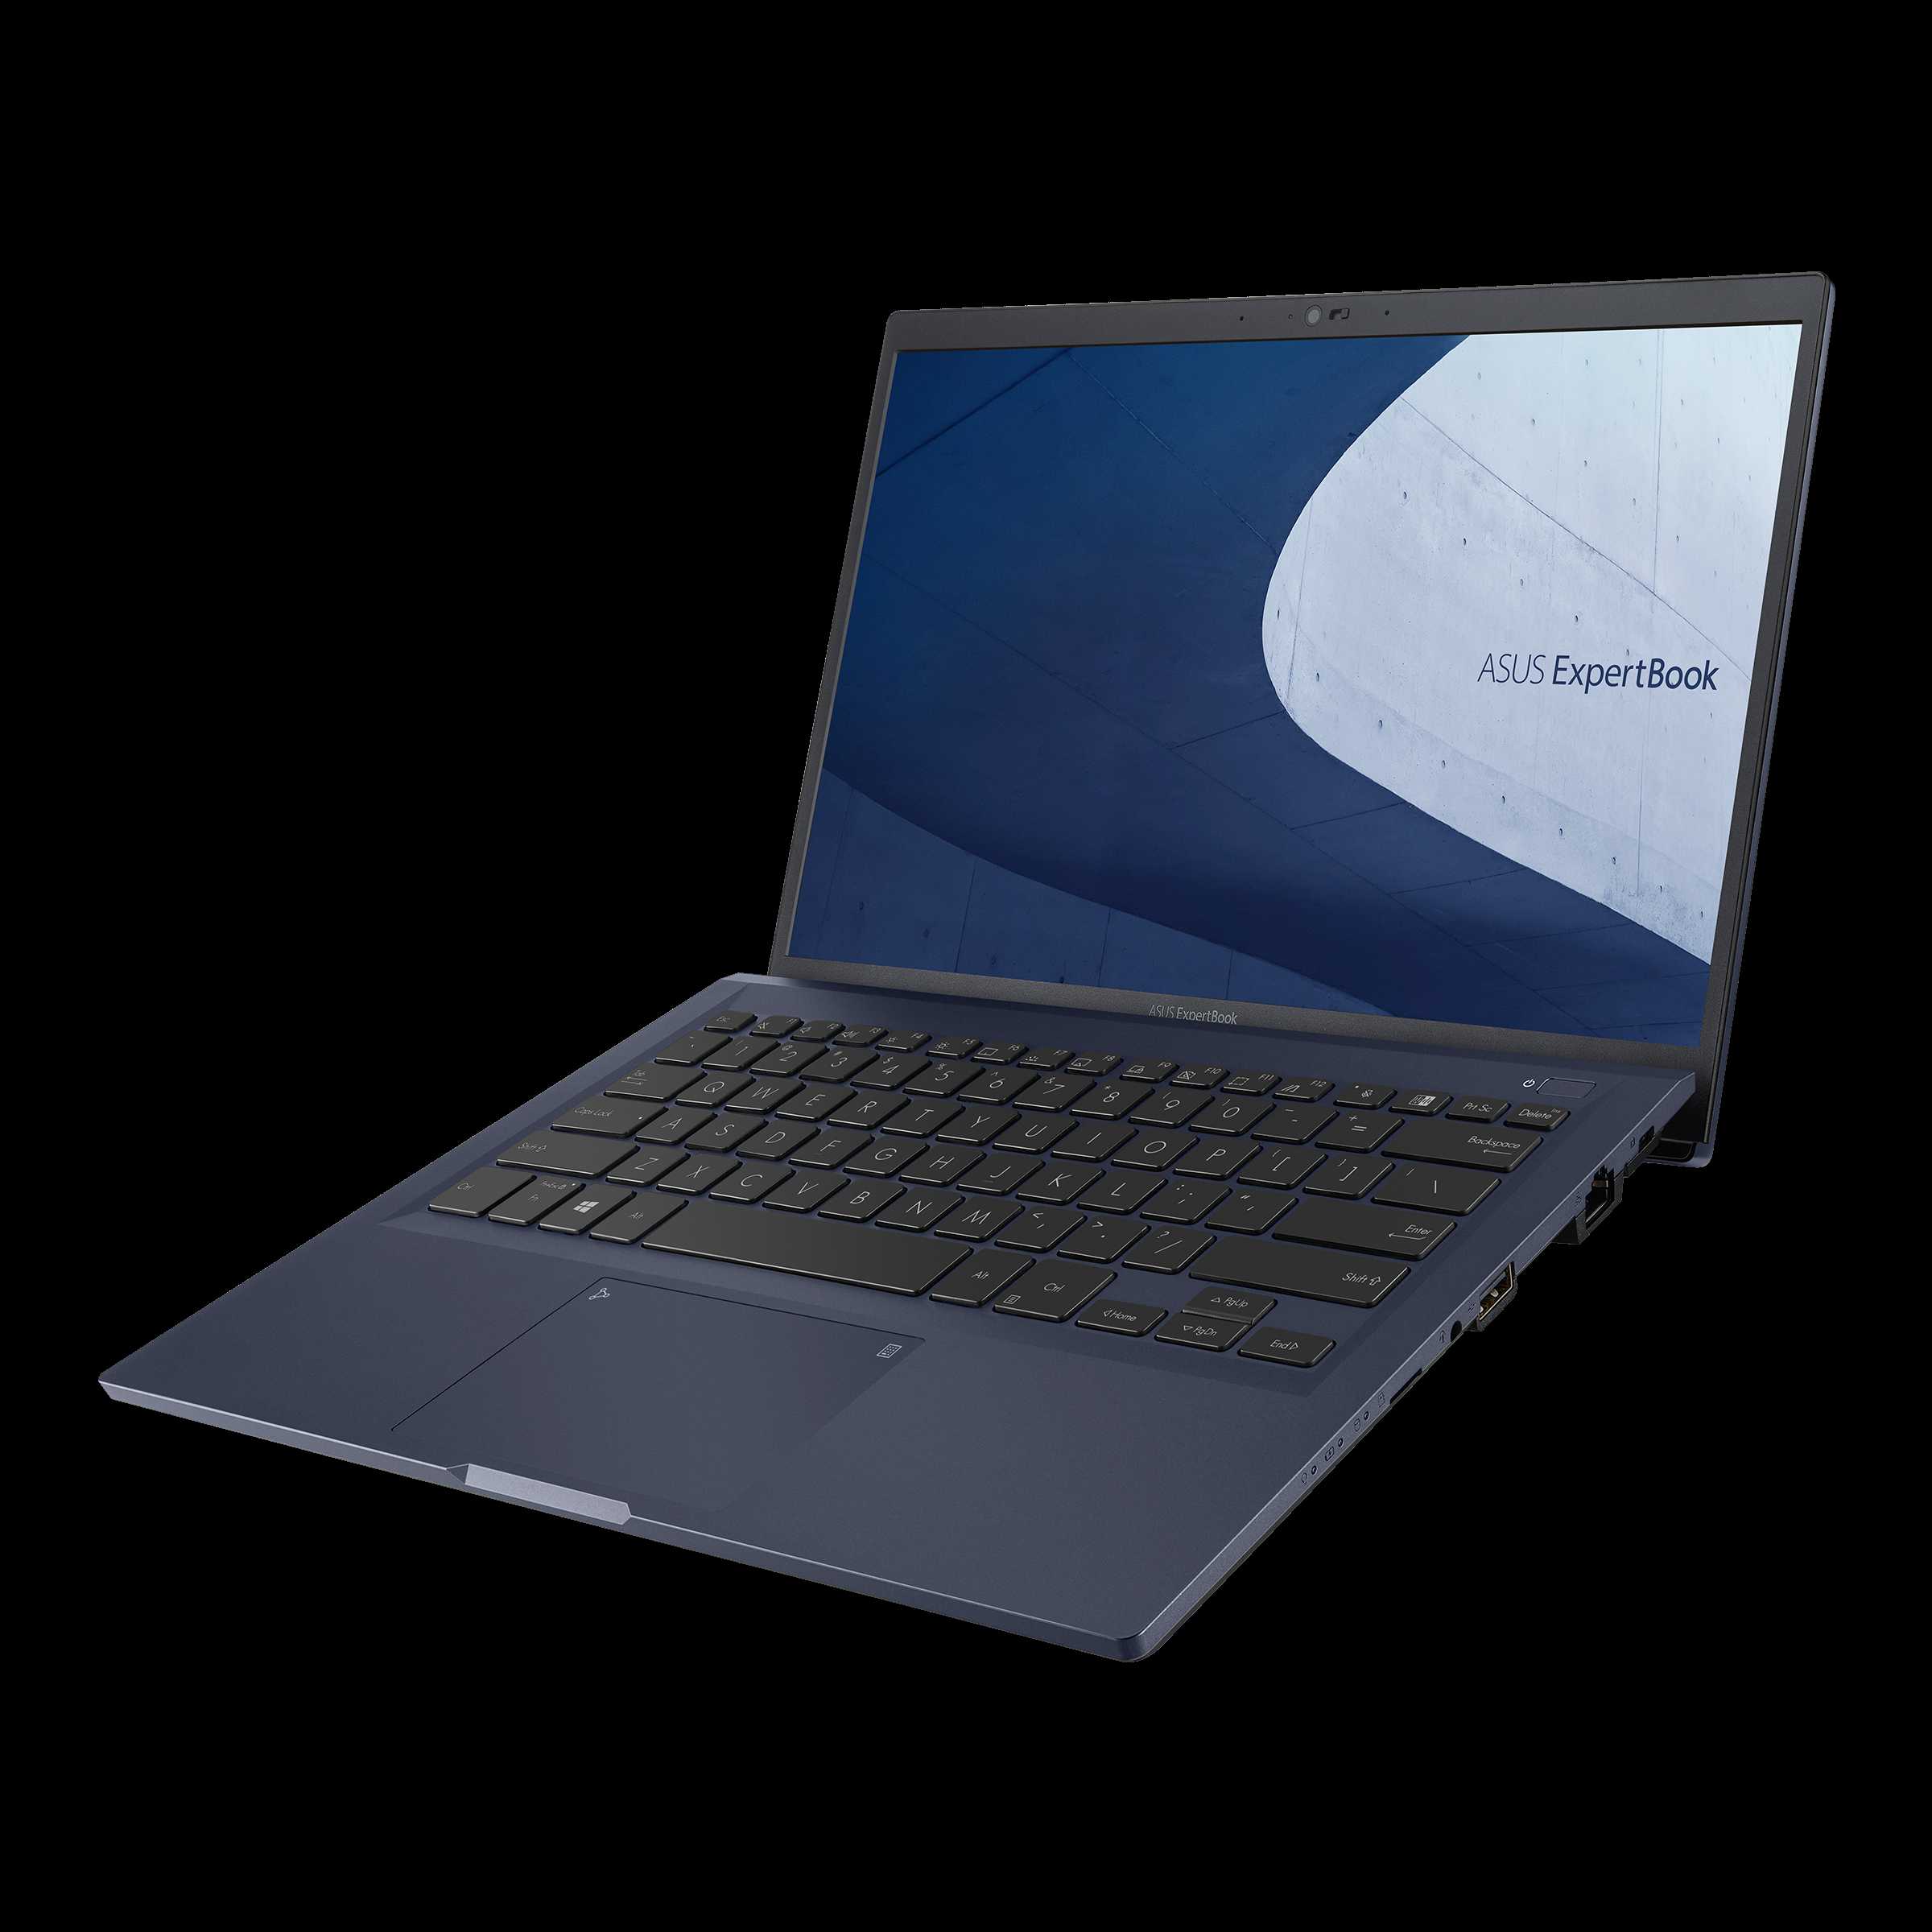 Laptop Asus ExpertBook B1400CEAE-EK6048 (14" Full HD/220NITS/INTEL i5-1135G7/ 8GB DDR4/512GB M.2 NVMe™ PCIe® 3.0 SSD/Finger print/Free DOS/ WIFI6(802.11AX)+BT/TPM2.0/42WH/BAG/WIRELESS MOUSE/ 3 YW OSS)